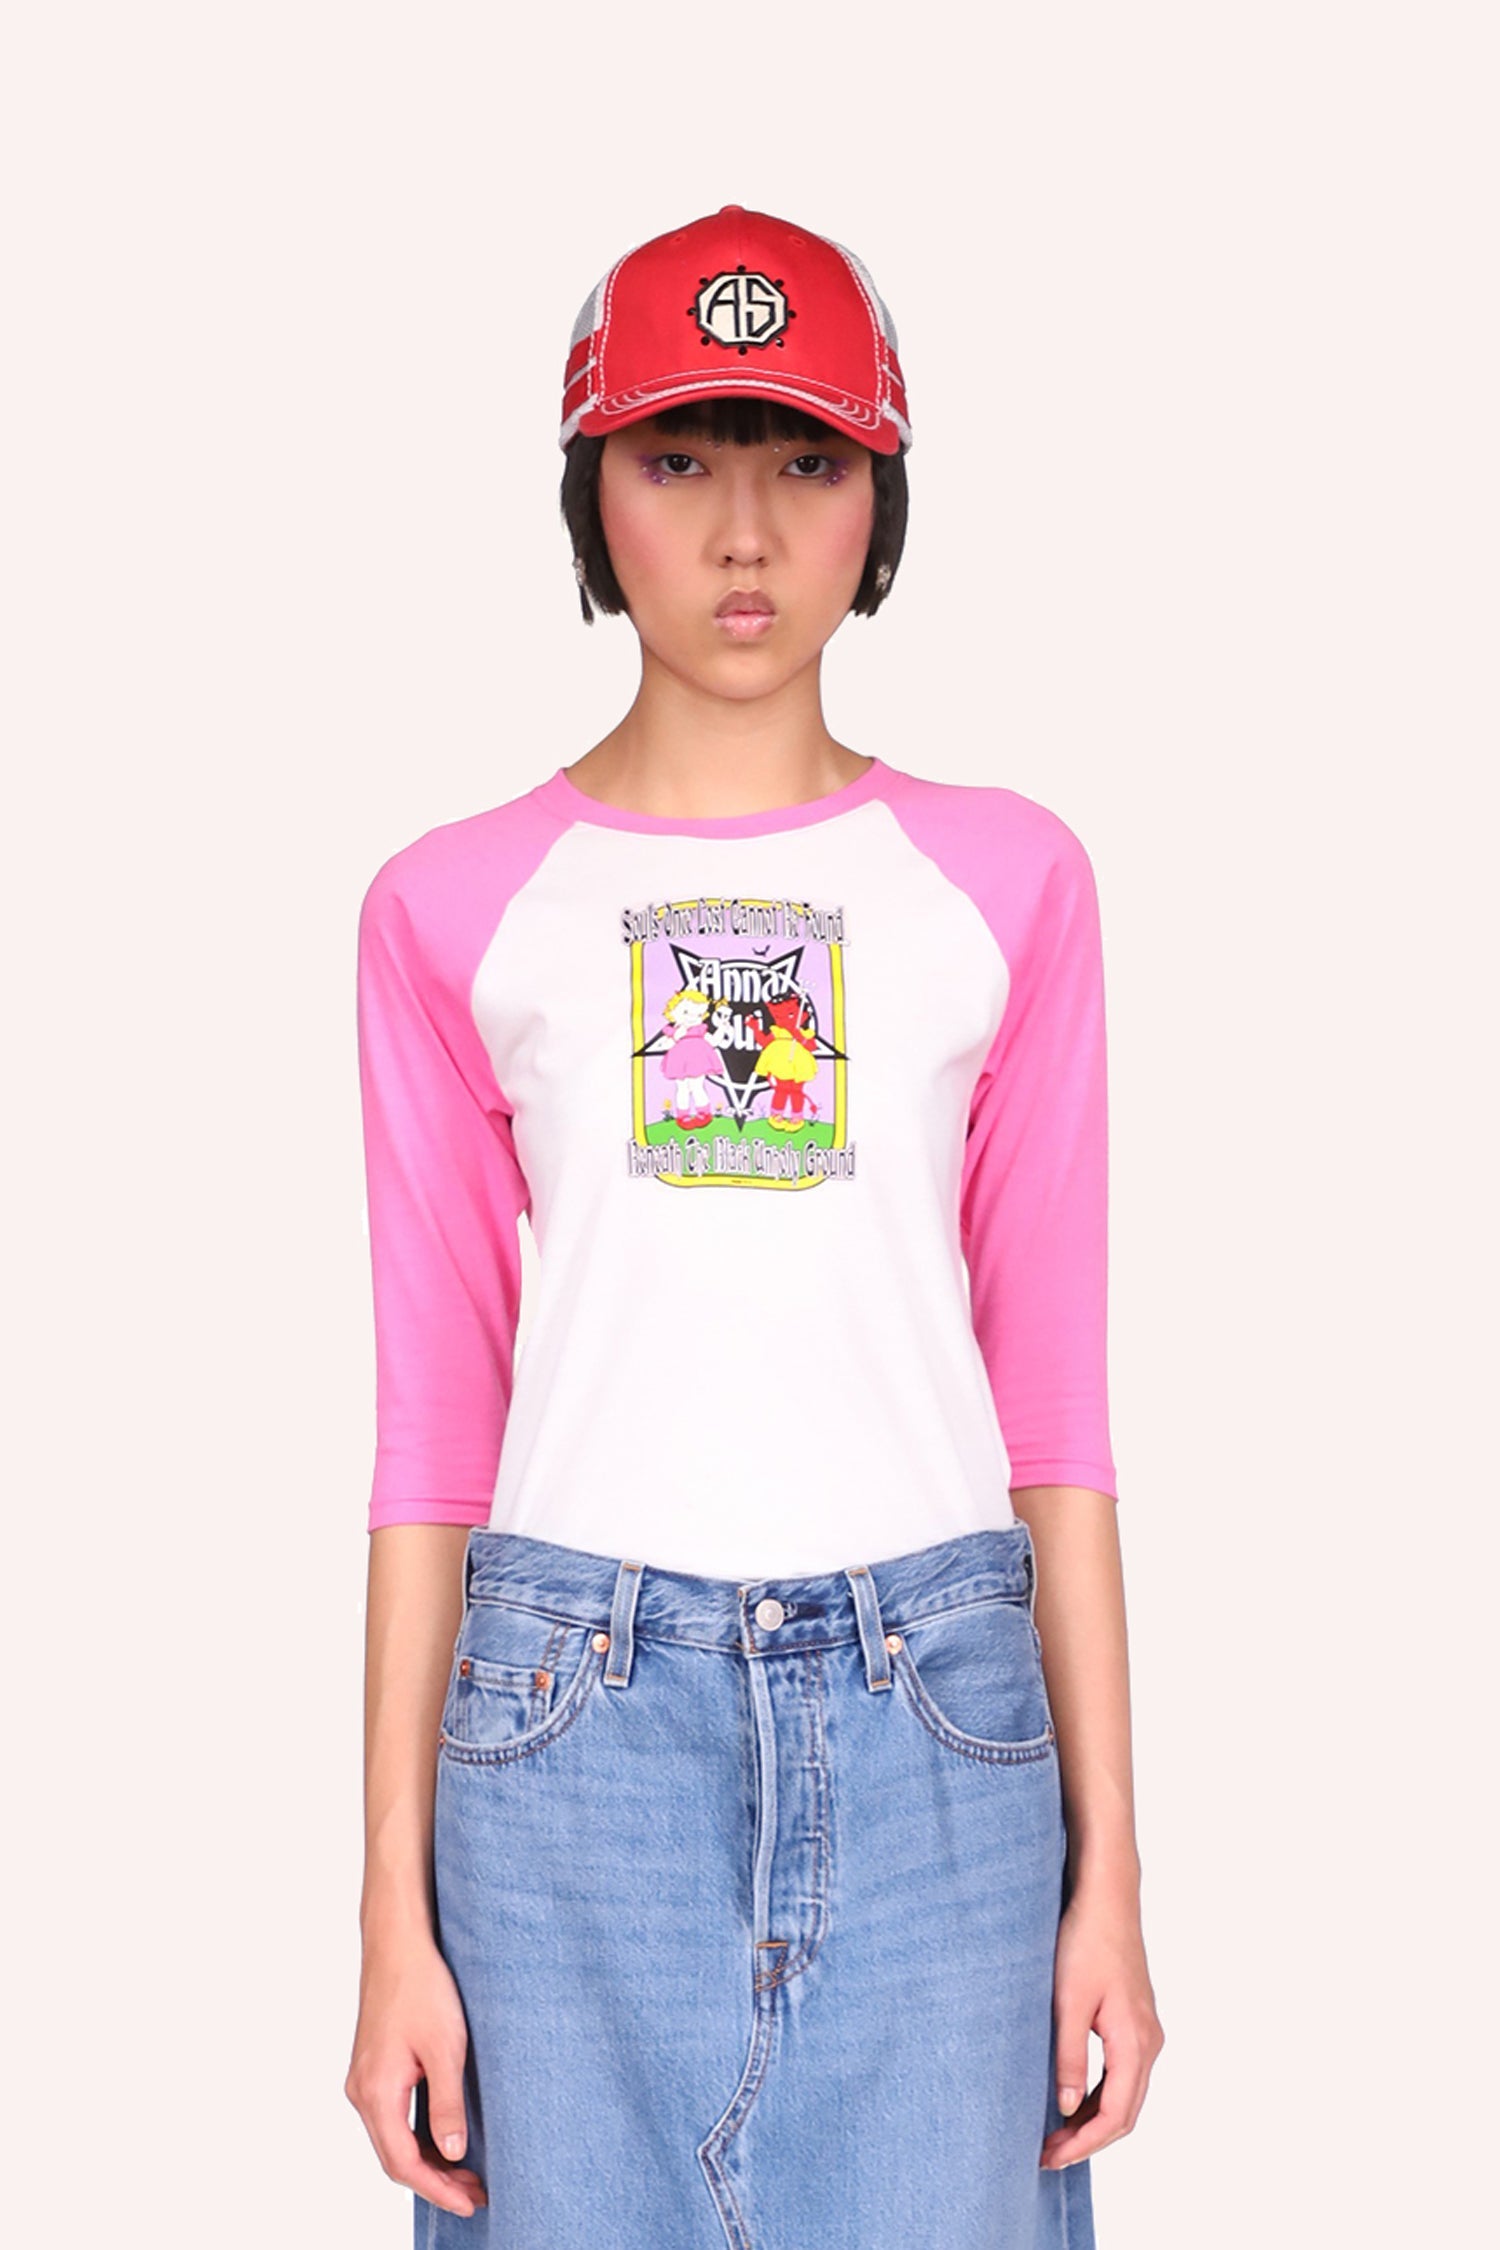 Tee, elbow long sleeves, pink shoulders and sleeves, white in front with a cartoonish Anna Sui